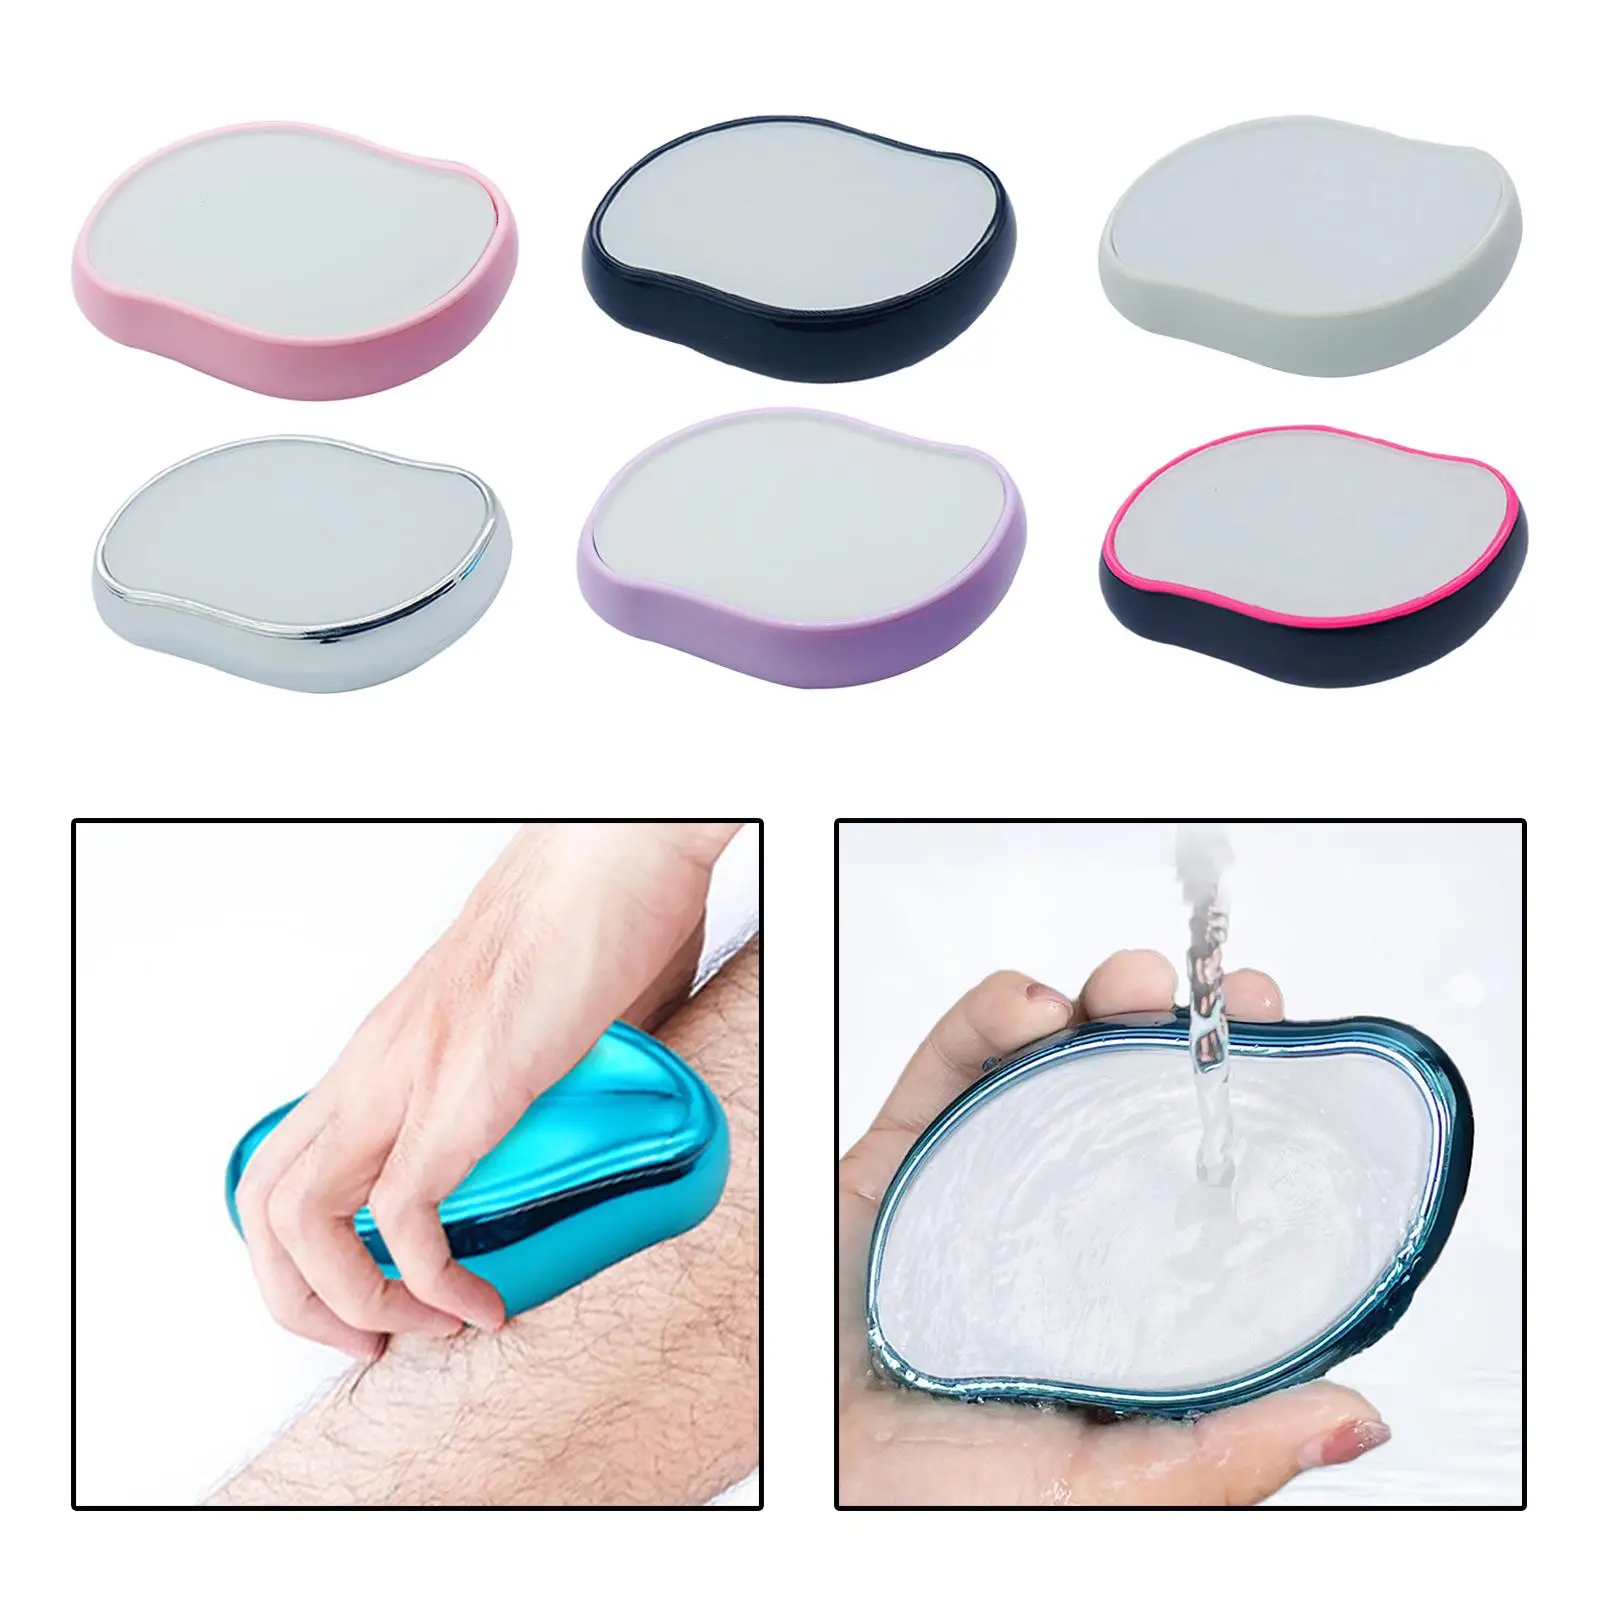 Physical Hair Removal Crystal Hair Remover Eraser Household Efficient Easy Cleaning for Armpits Back Legs Arms Bikini Facial 